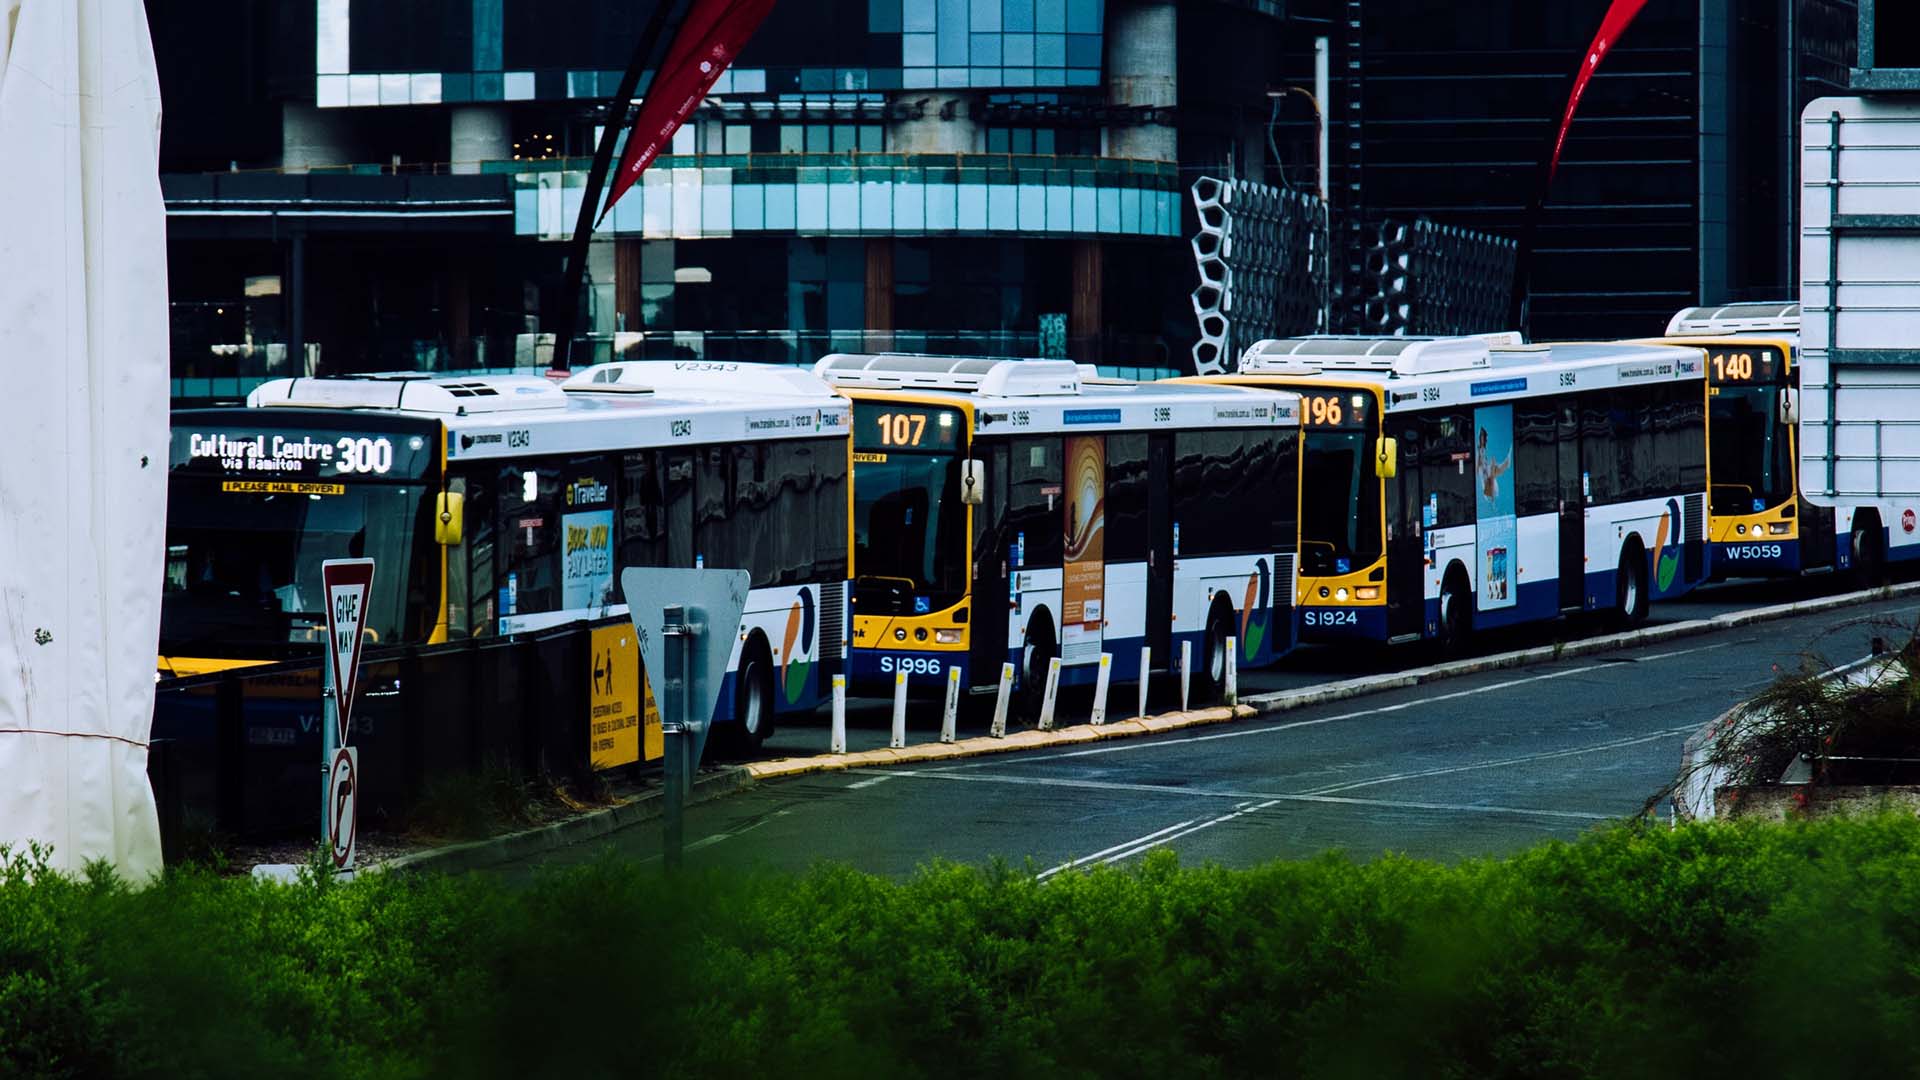 Over 1000 Extra Buses and Trains Are Being Added to Brisbane's Public Transport Network